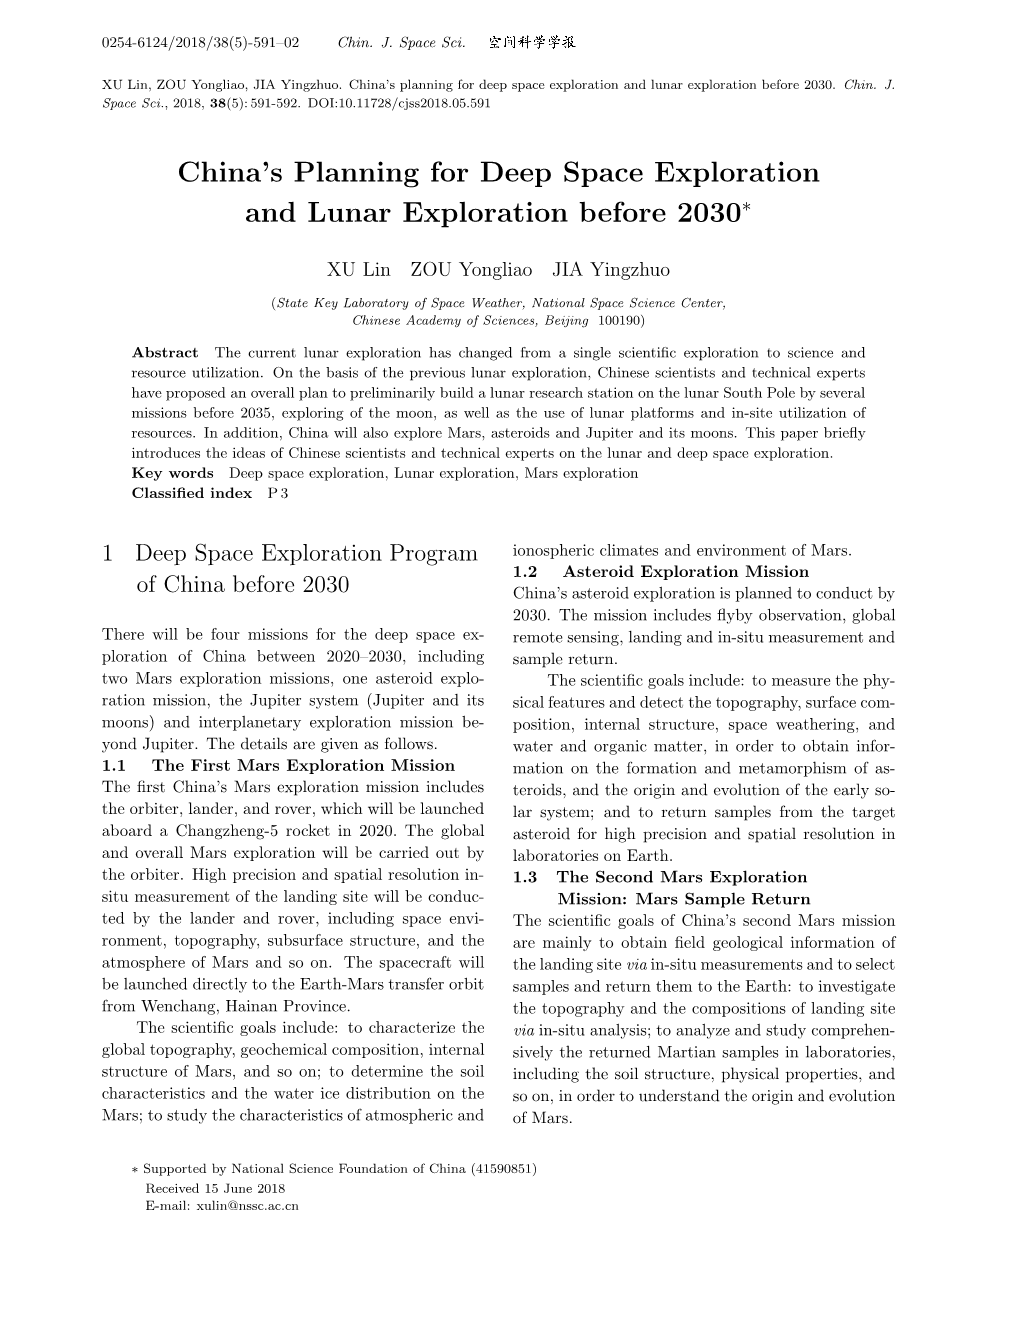 China's Planning for Deep Space Exploration and Lunar Exploration